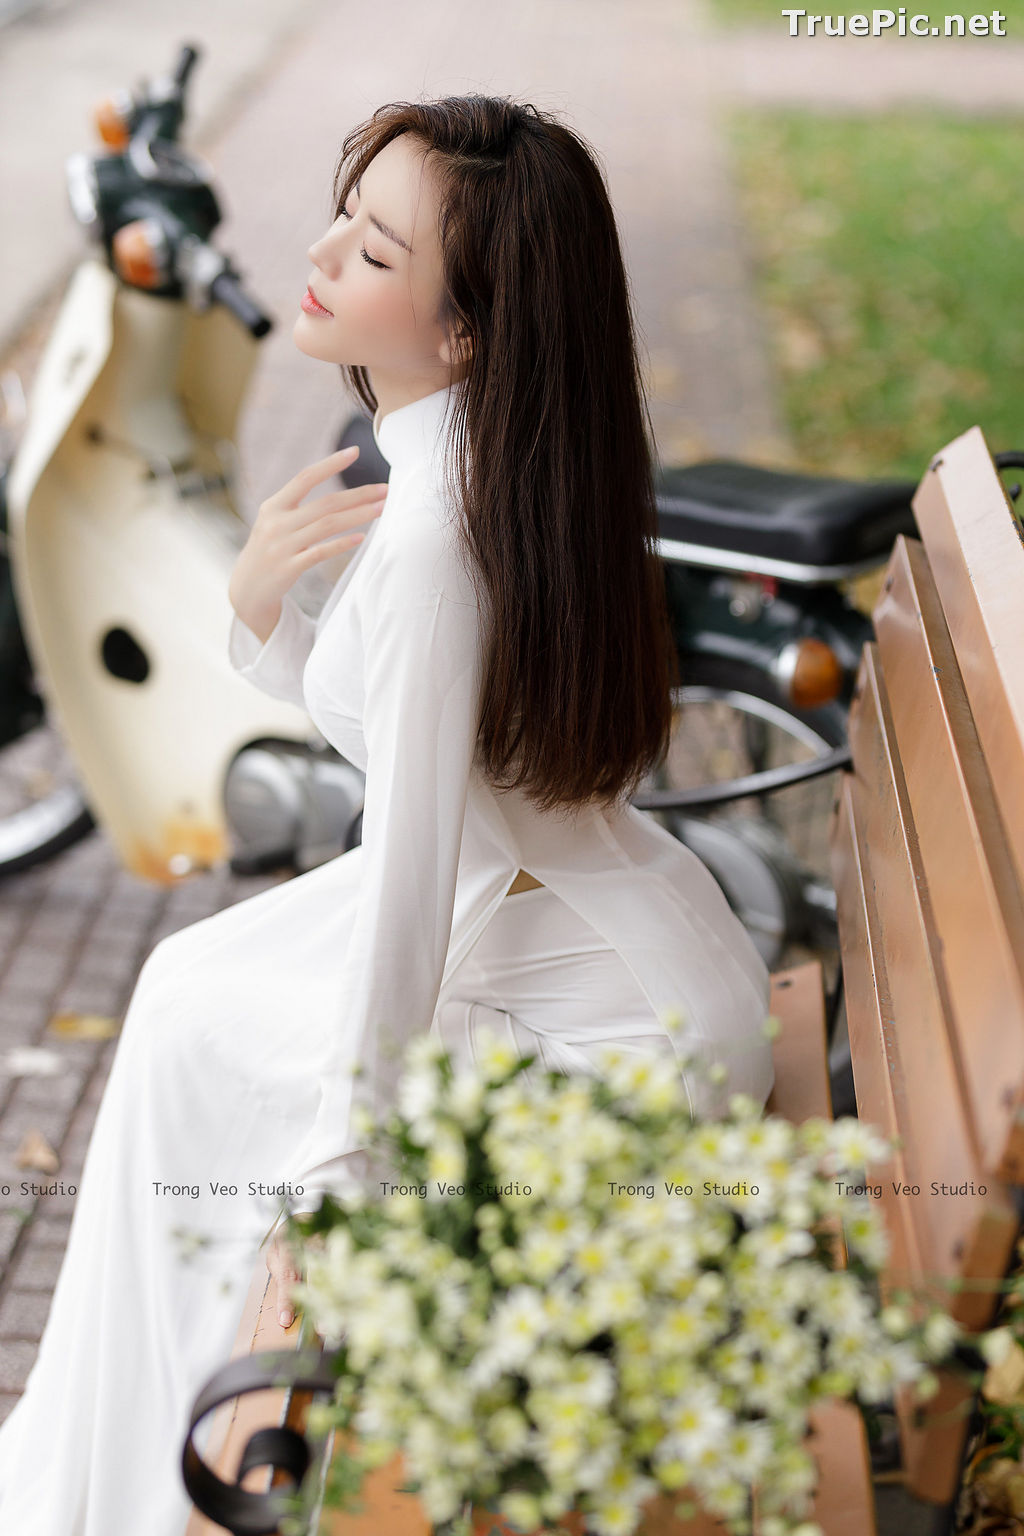 Image The Beauty of Vietnamese Girls with Traditional Dress (Ao Dai) #1 - TruePic.net - Picture-29